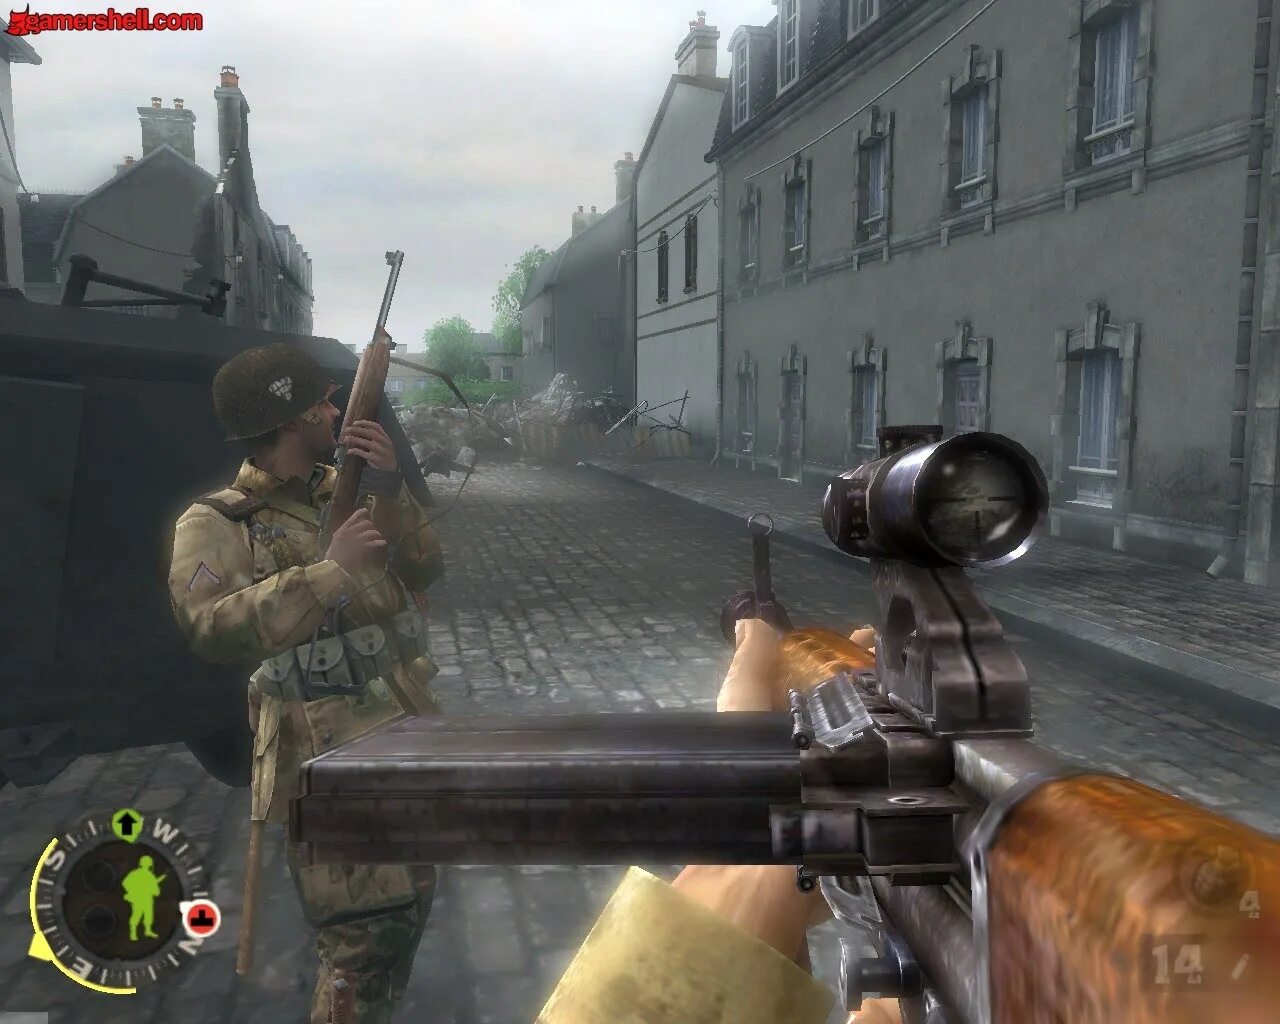 Игры стрелялки пс. Игра brothers in Arms earned in Blood. Игра brothers in Arms 1. Brothers in Arms: earned in Blood (2005). Brothers in Arms 2005.